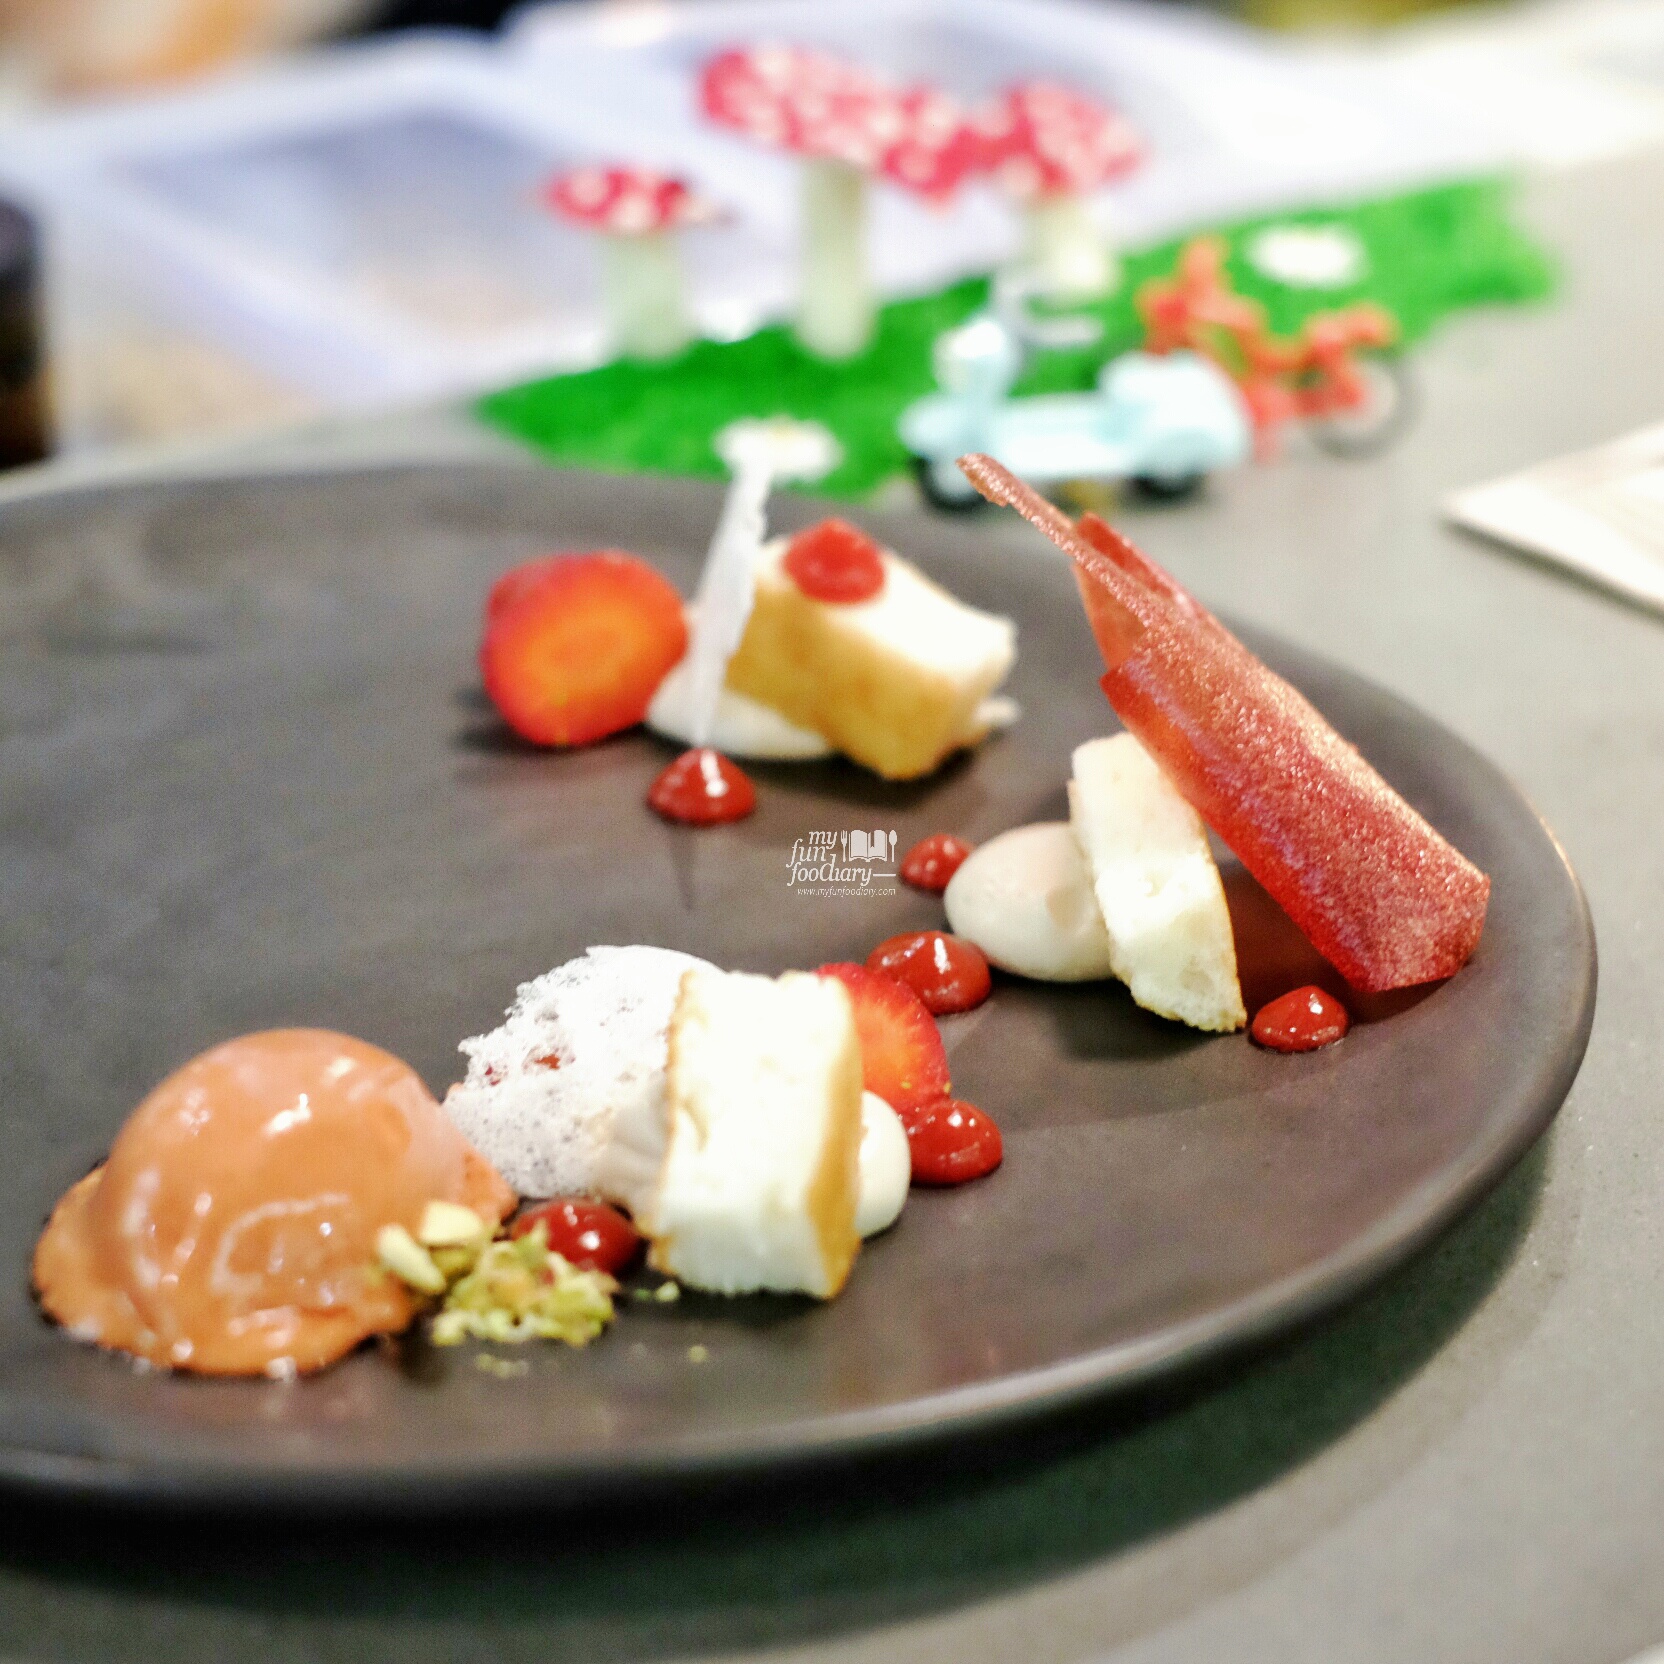 All About Strawberry - Dessert Omakase by Kim at Nomz - by Myfunfoodiary 03